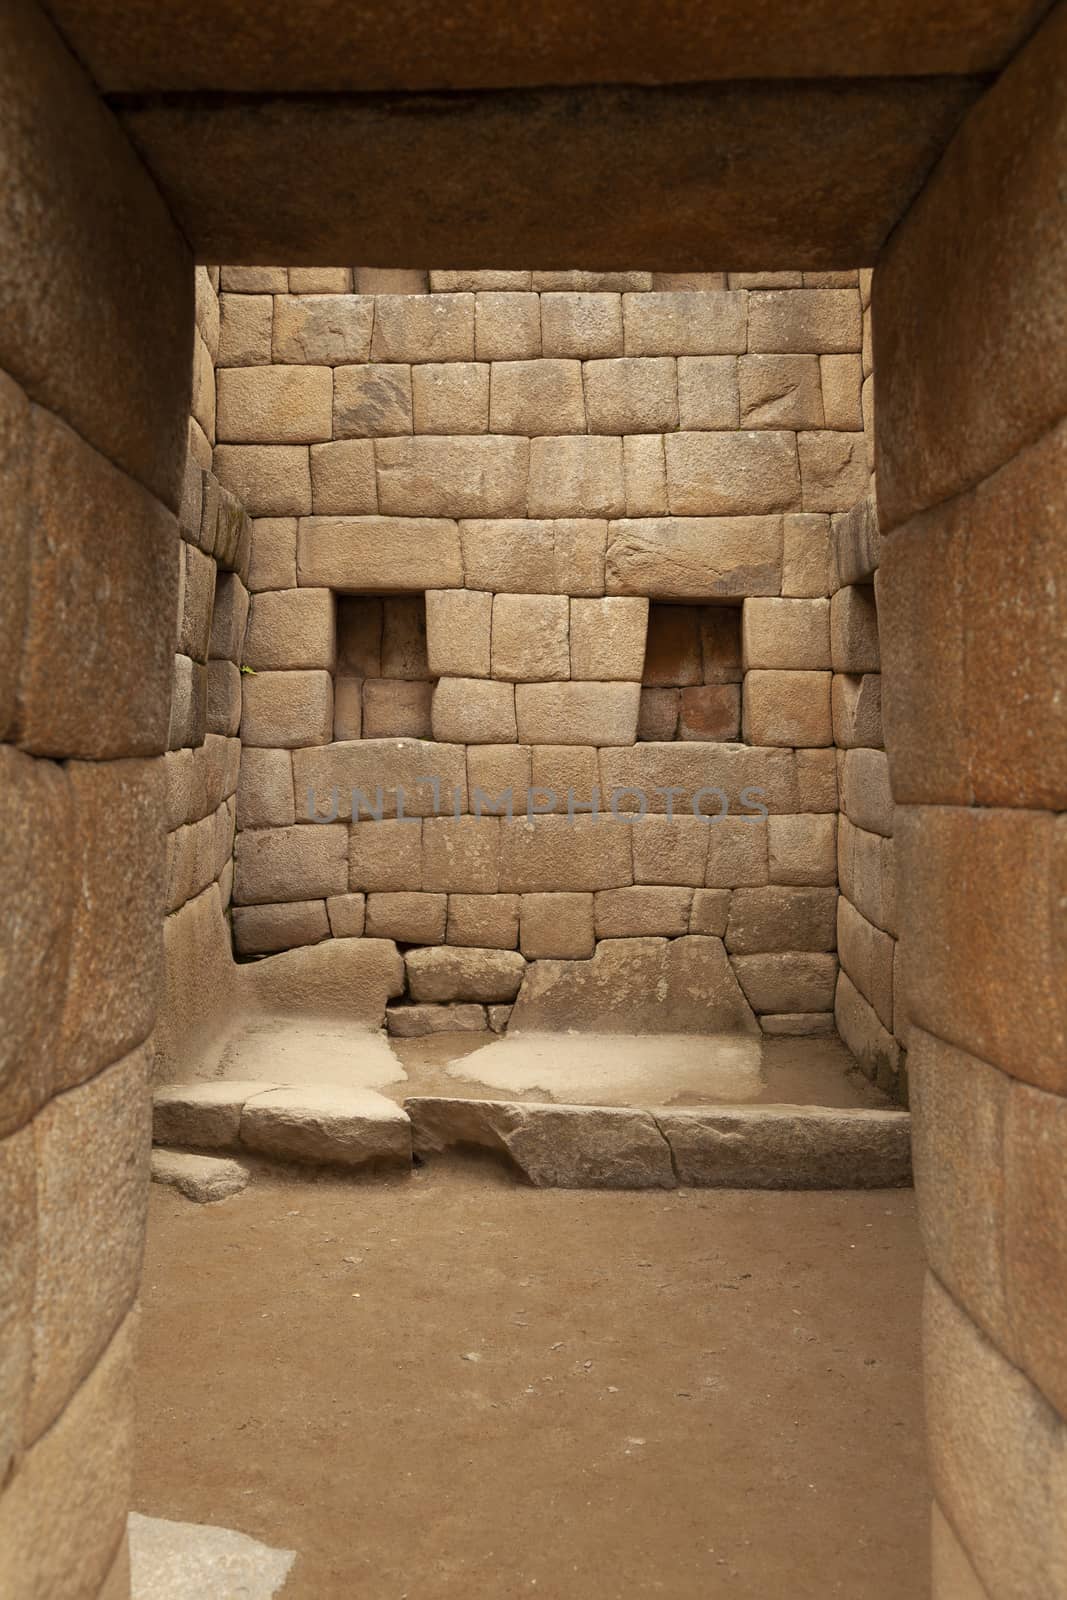 Machu Picchu, Peru - April 6, 2014: Architecture and details of the ancestral constructions and buildings of the Inca civilization, in Machu Picchu, Peru.